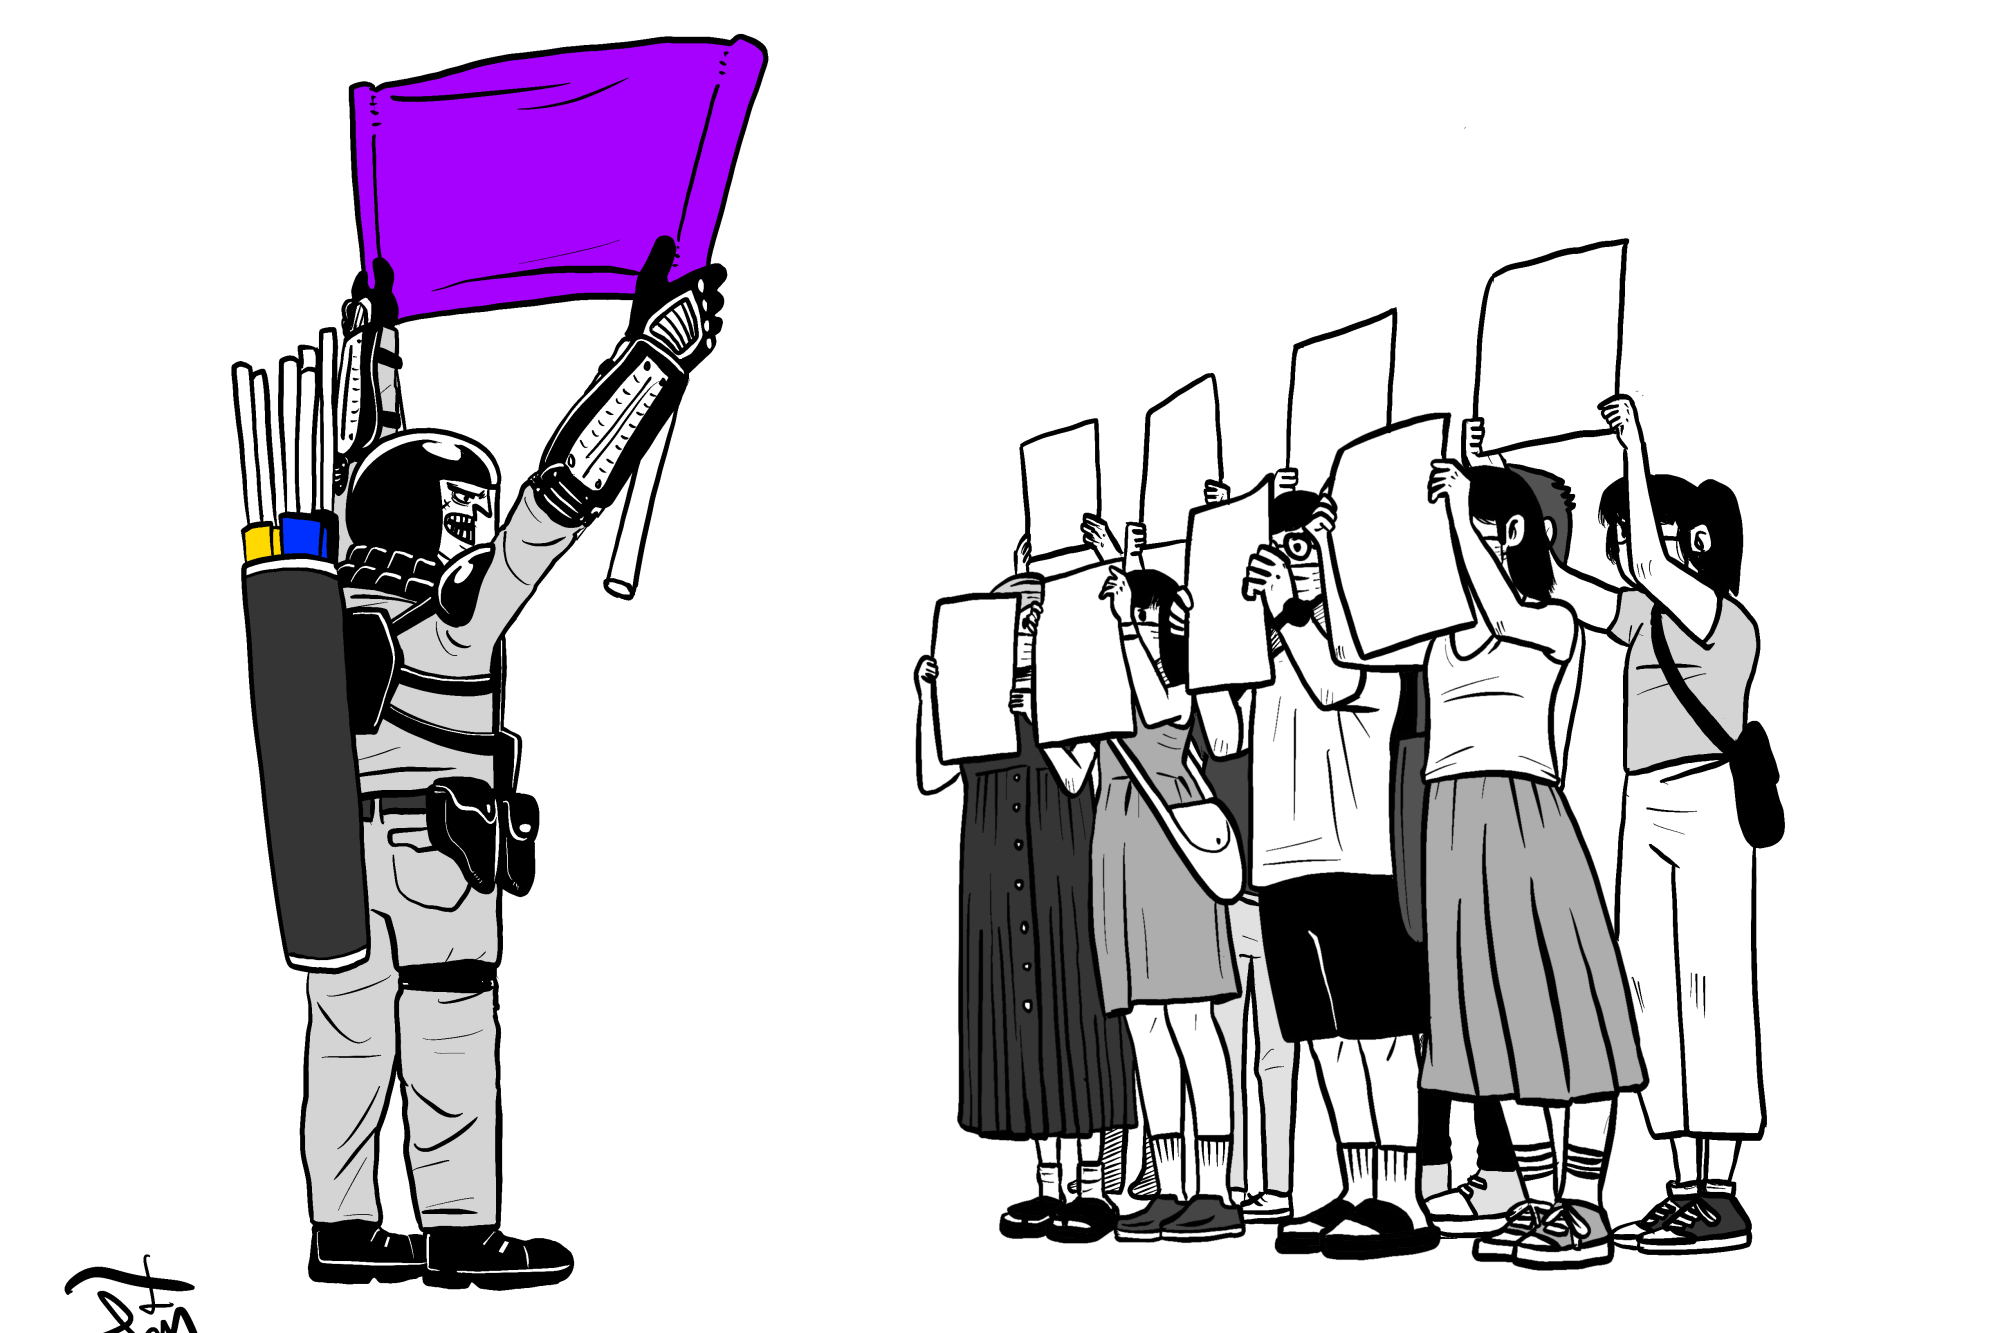 A cartoon by Hong Kong artist Kit Man depicts protesters facing police with blank sheets of paper.